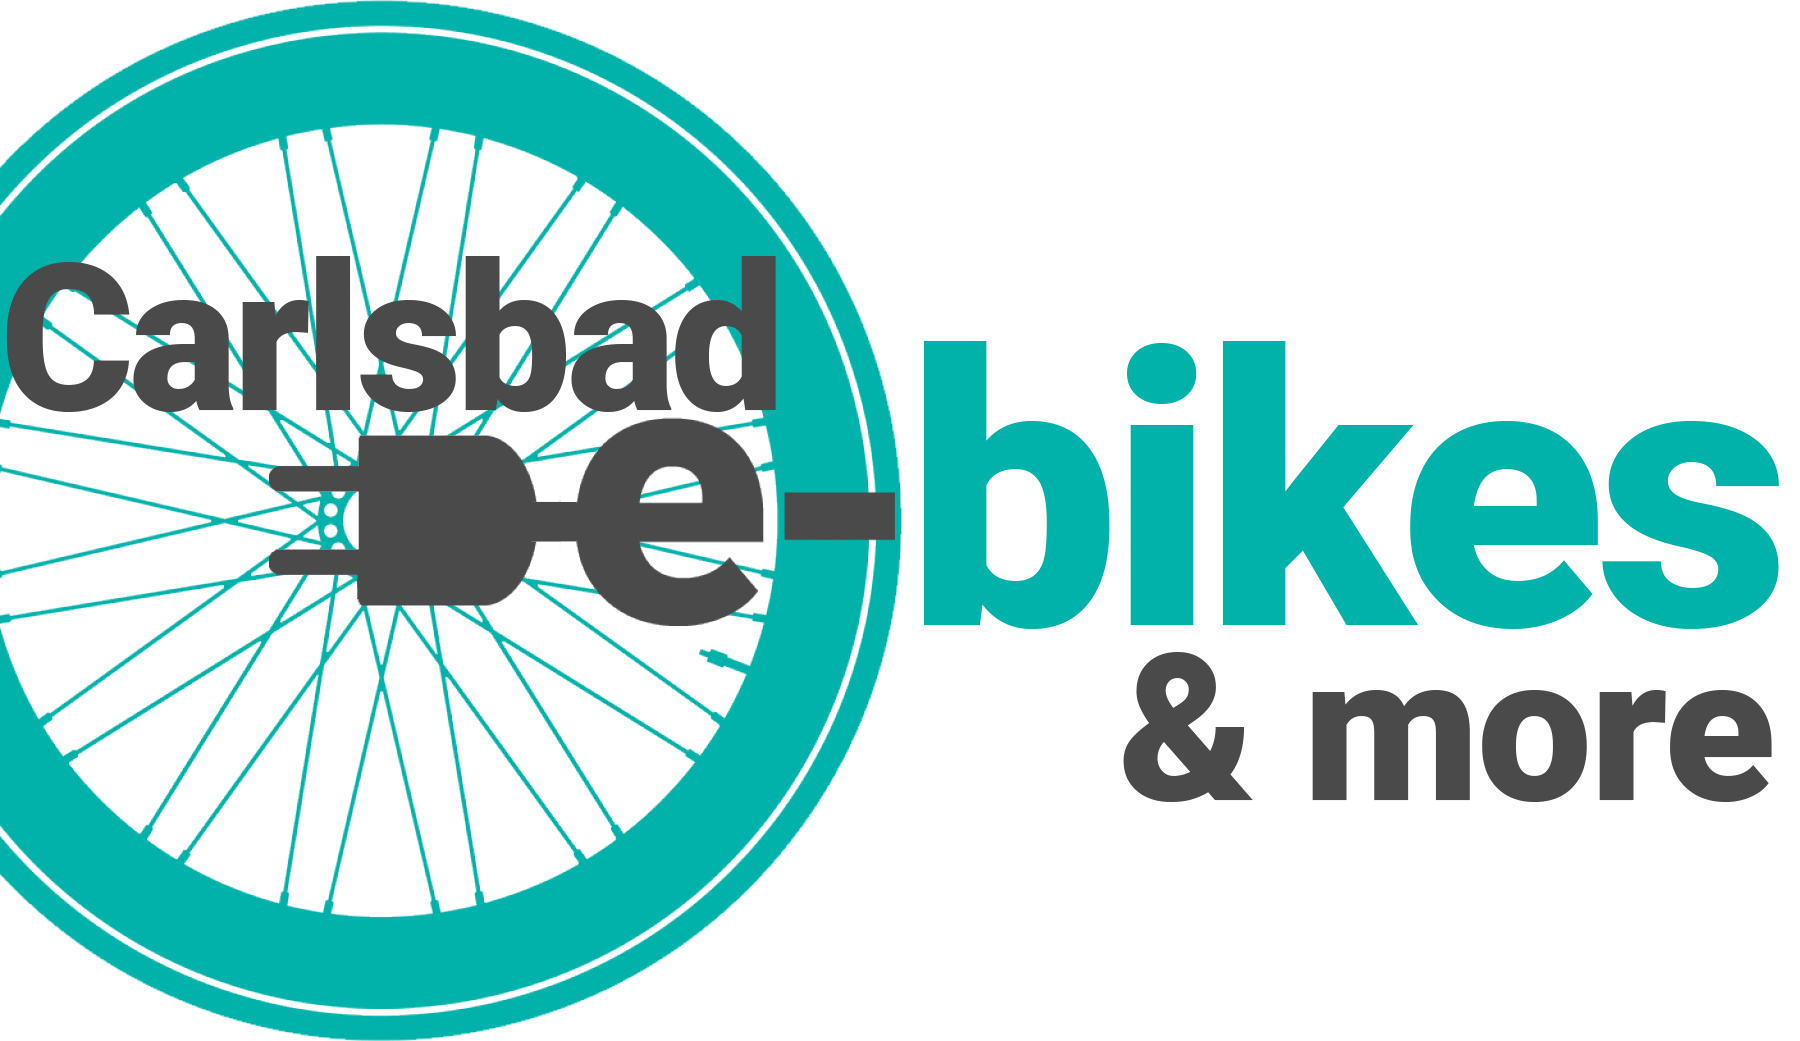 Carlsbad e-Bikes & More | The Best e-Bikes, Pedal Bikes, Golf Carts, and Accessories in Carlsbad CA